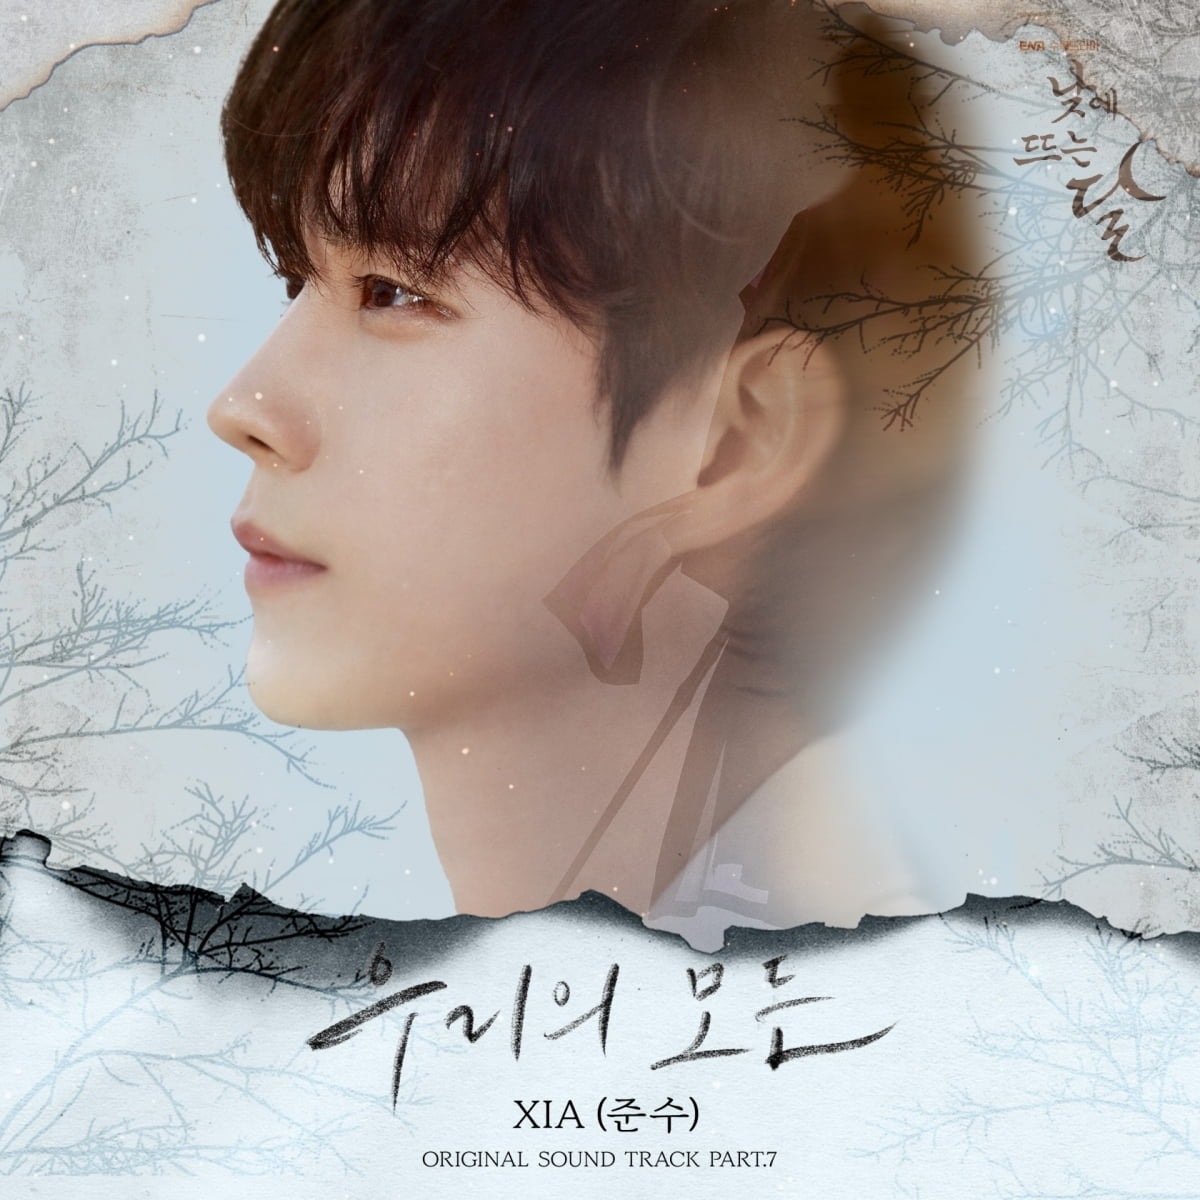 Kim Junsu releases OST for ‘Rising Day’